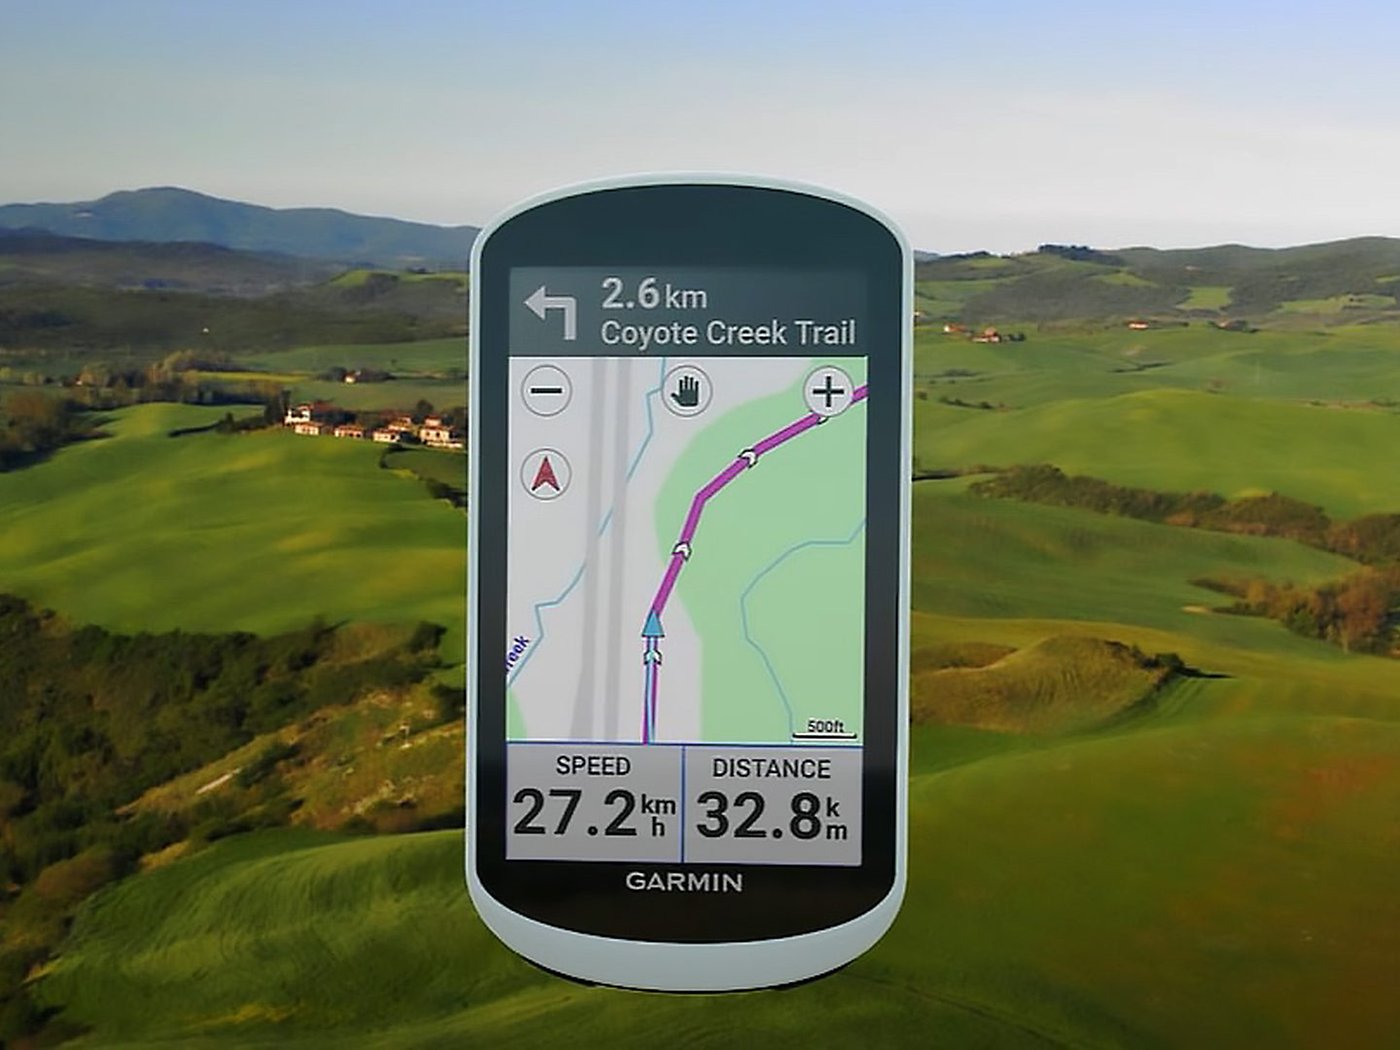 Discover new routes with the Edge Explore 2 series from Garmin